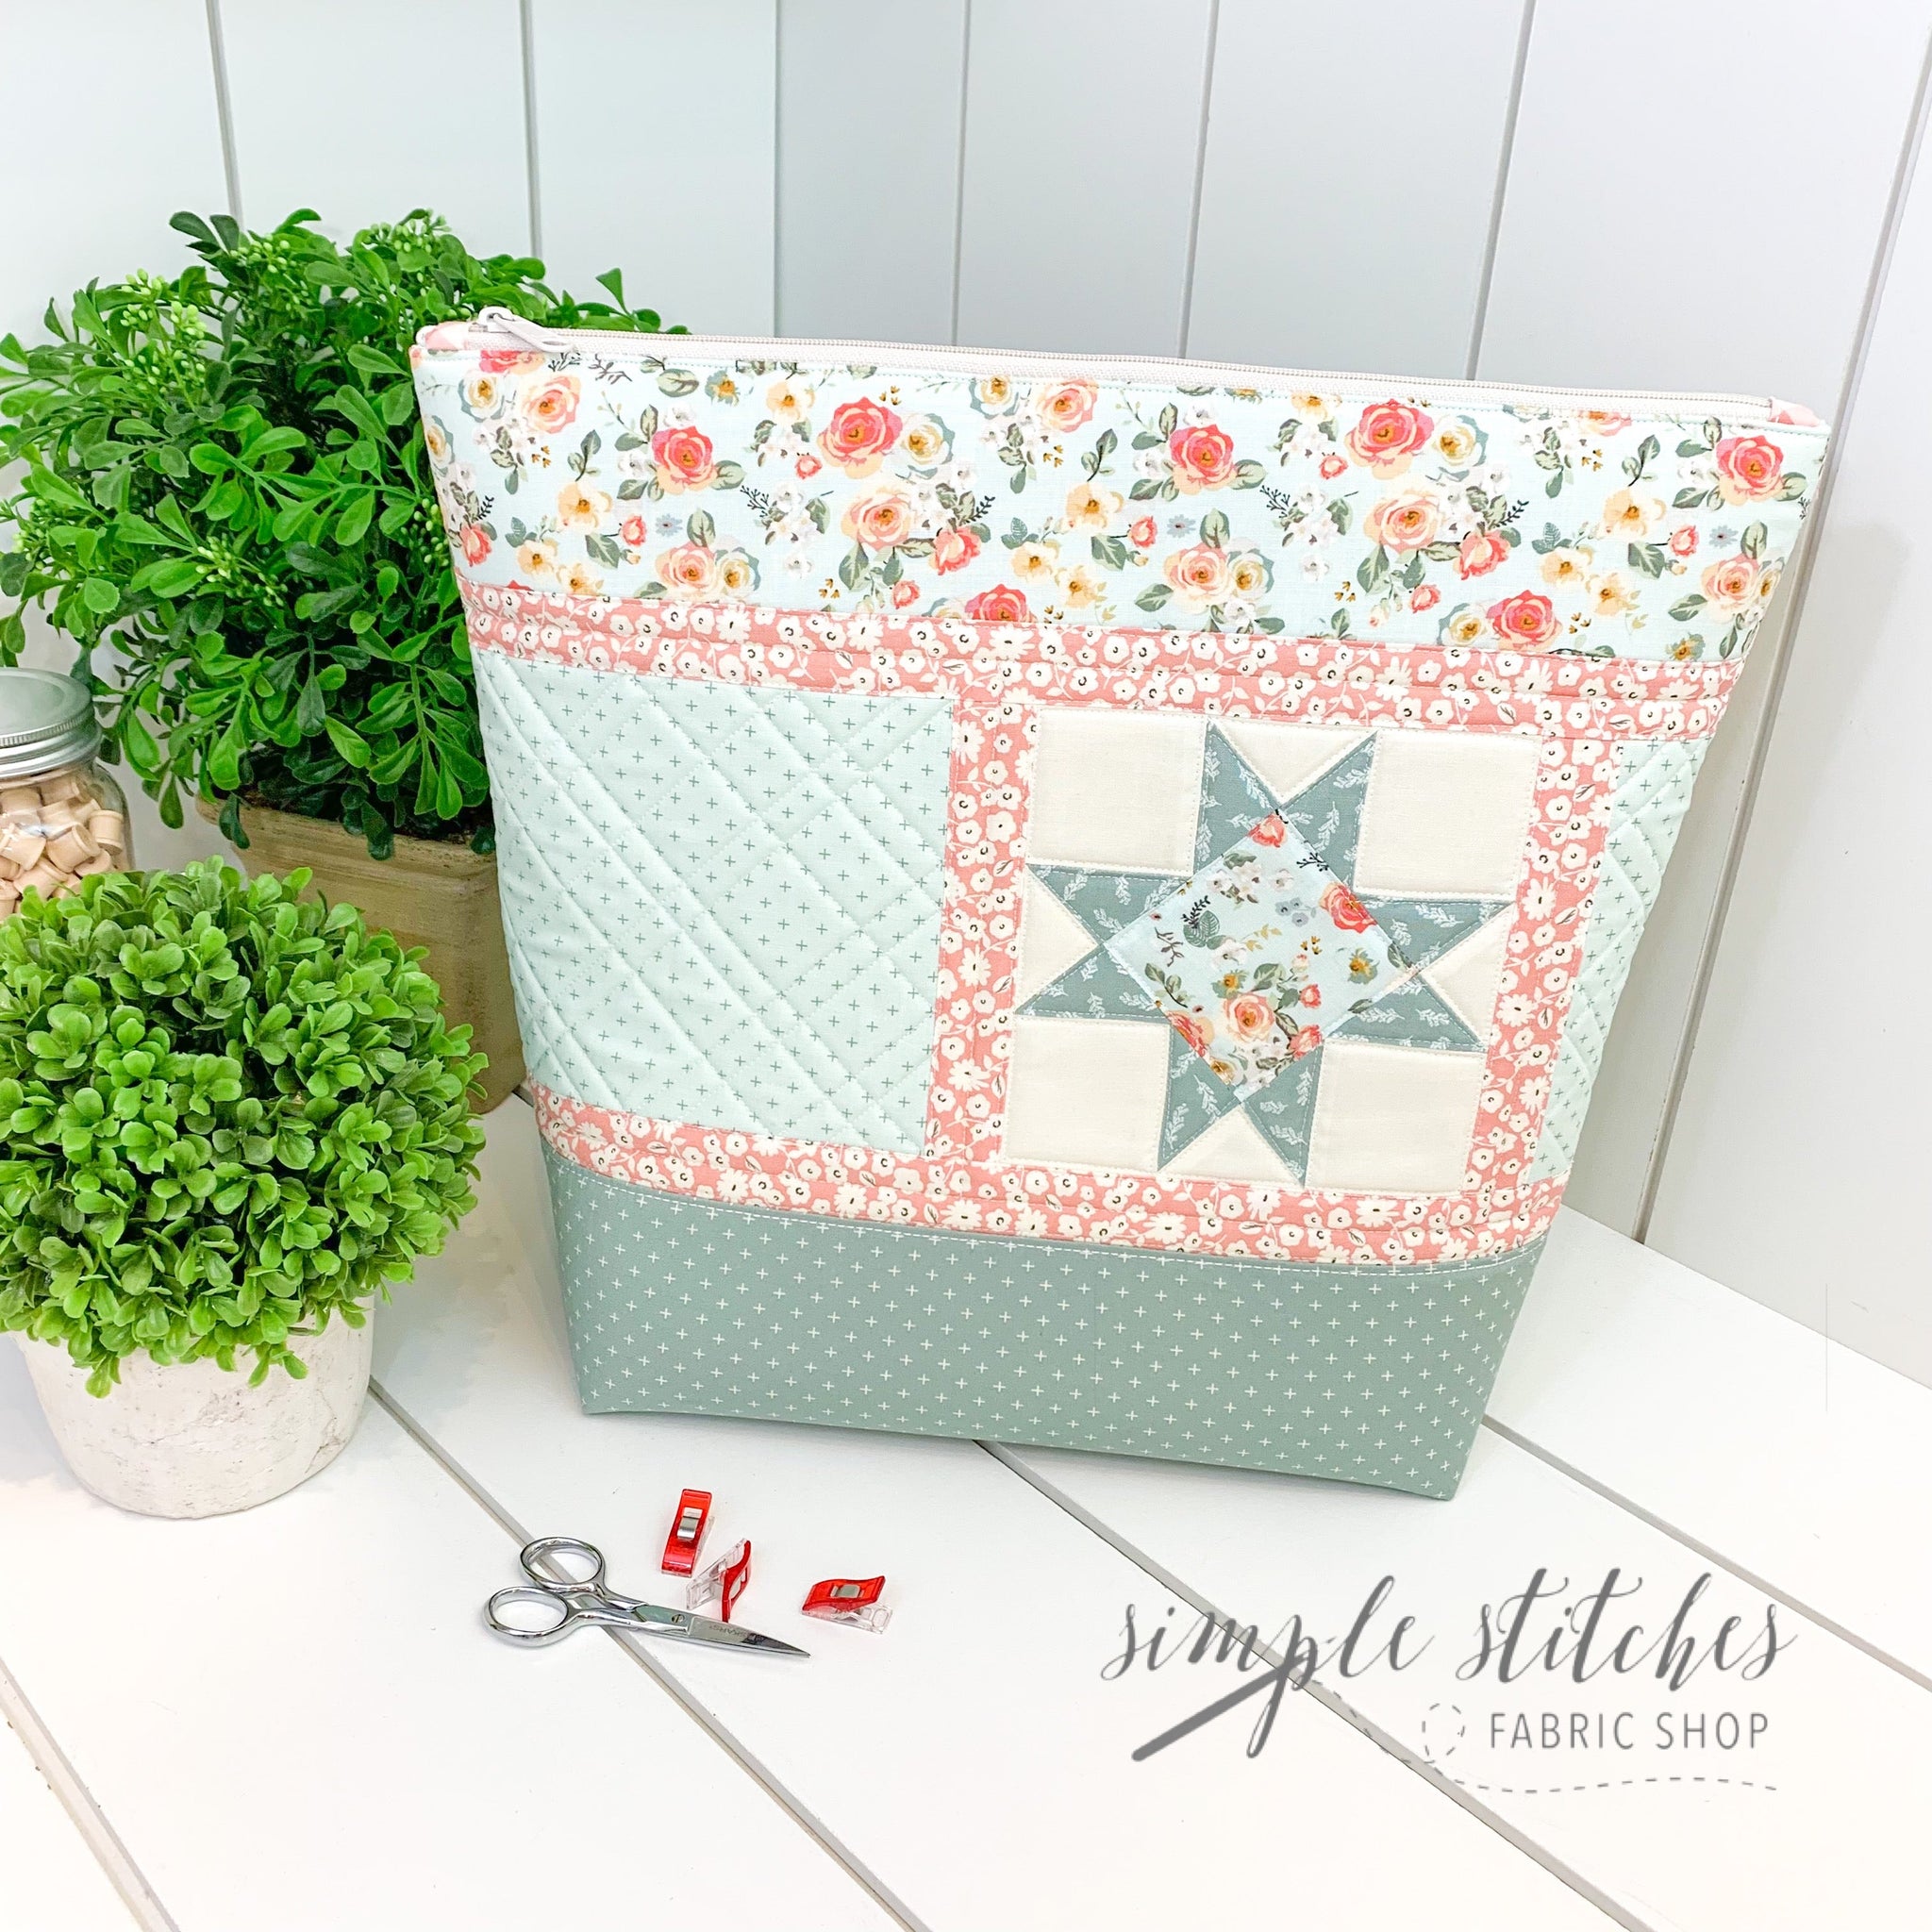 [Bag Pattern] Square Patch Bag by byhands Hand Craft | Michaels